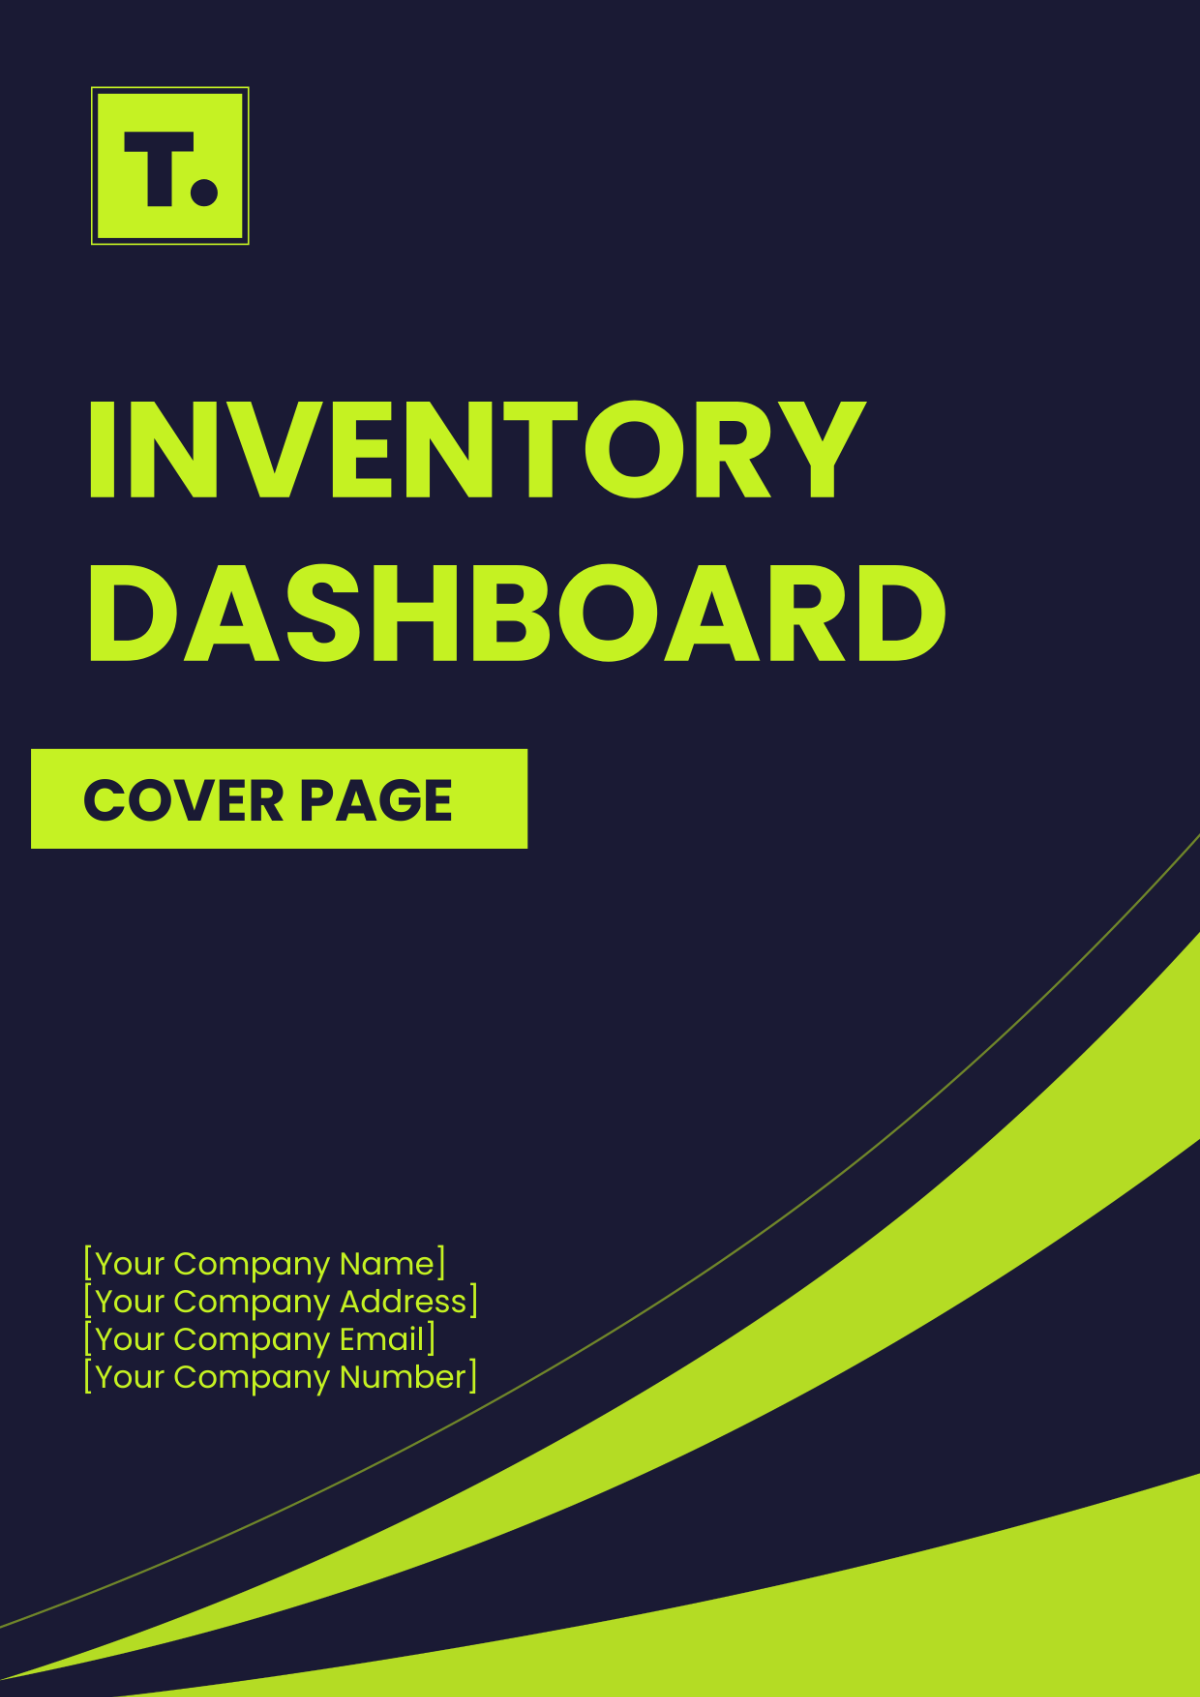 Inventory Dashboard Cover Page